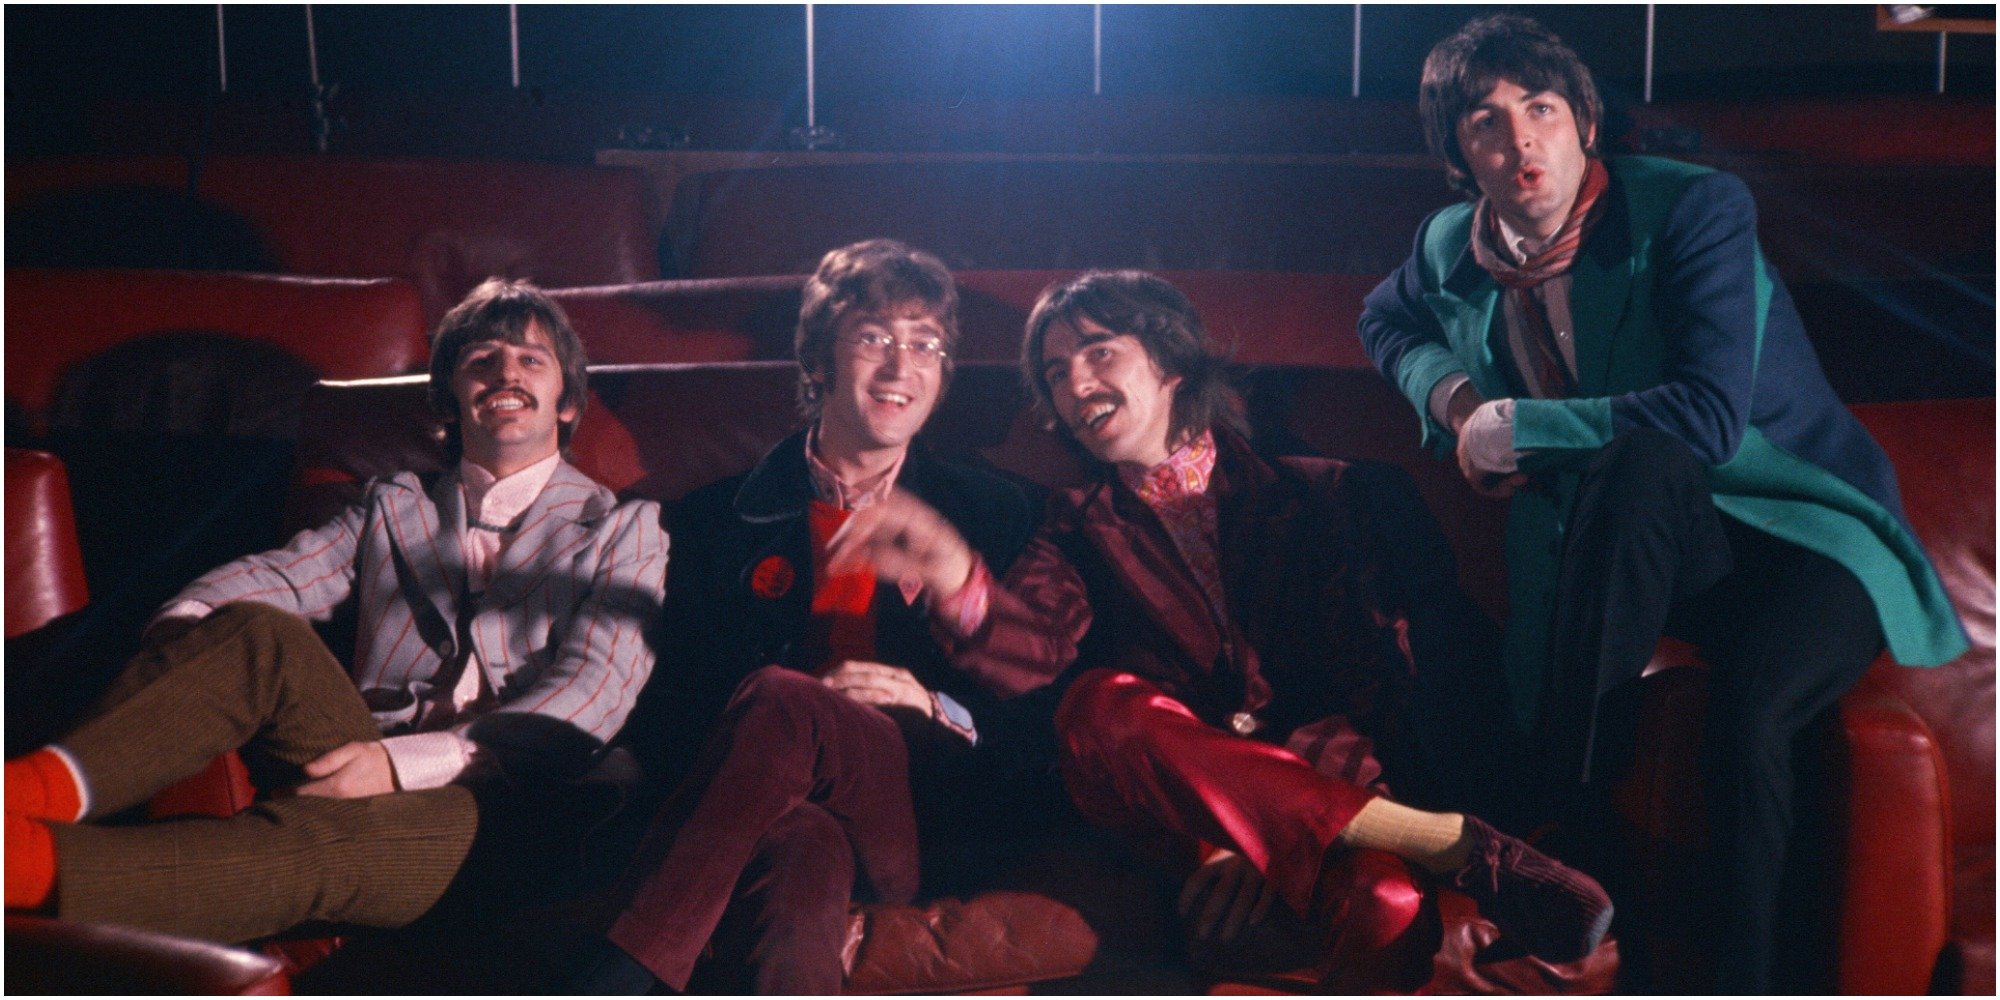 The Beatles at TVC's animation studios, participating in "Mod Odyssey," a film about the creation of Yellow Submarine, November 6, 1967 in London, United Kingdom.